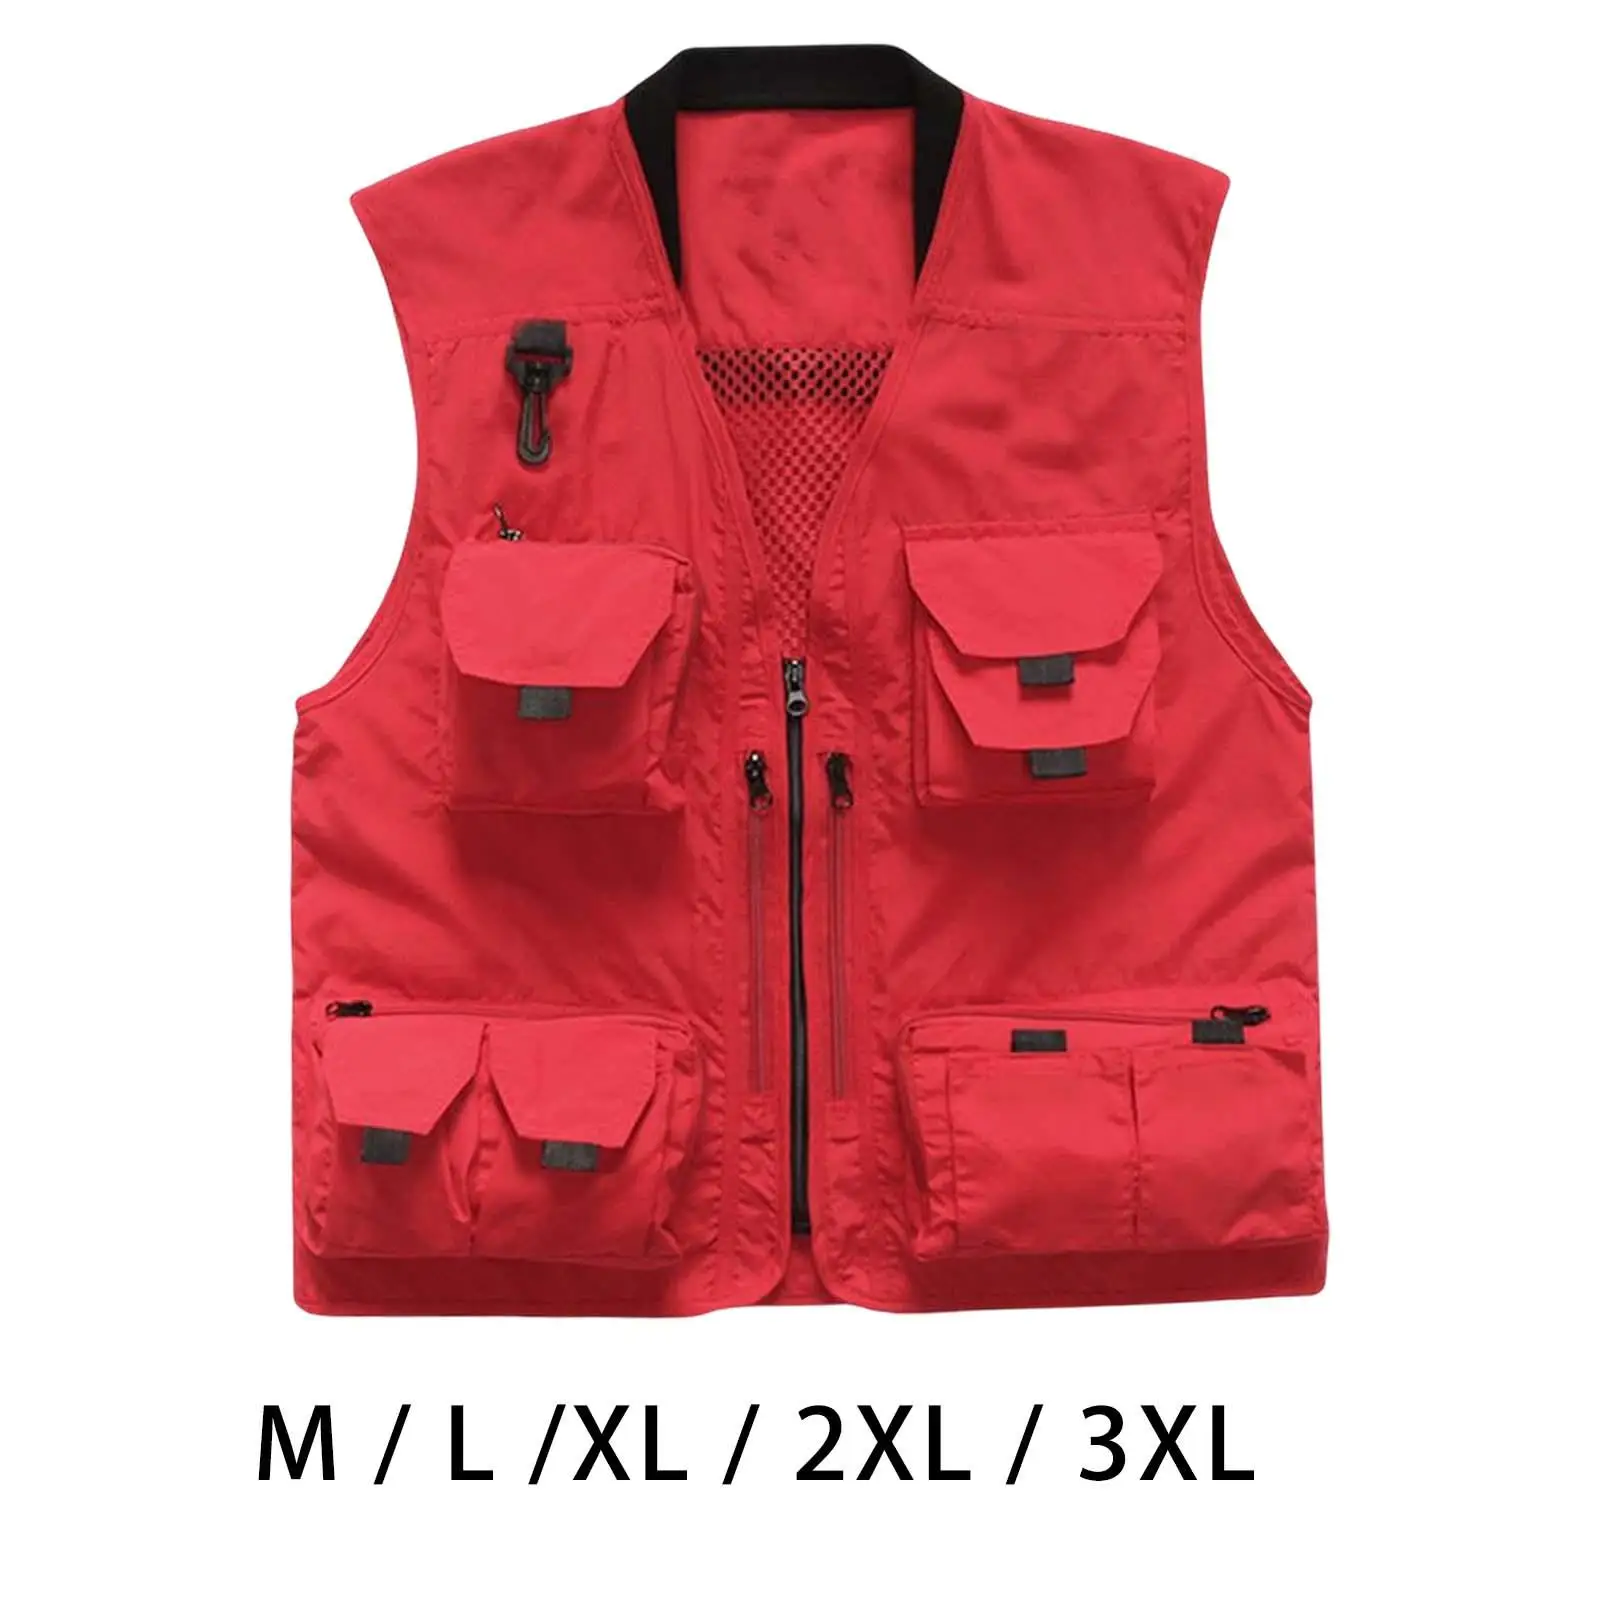 Casual Fishing Vest Mesh with Pockets Clothes Costume Photography Lightweight Mens Jacket for Outdoor Activities Climbing Sports